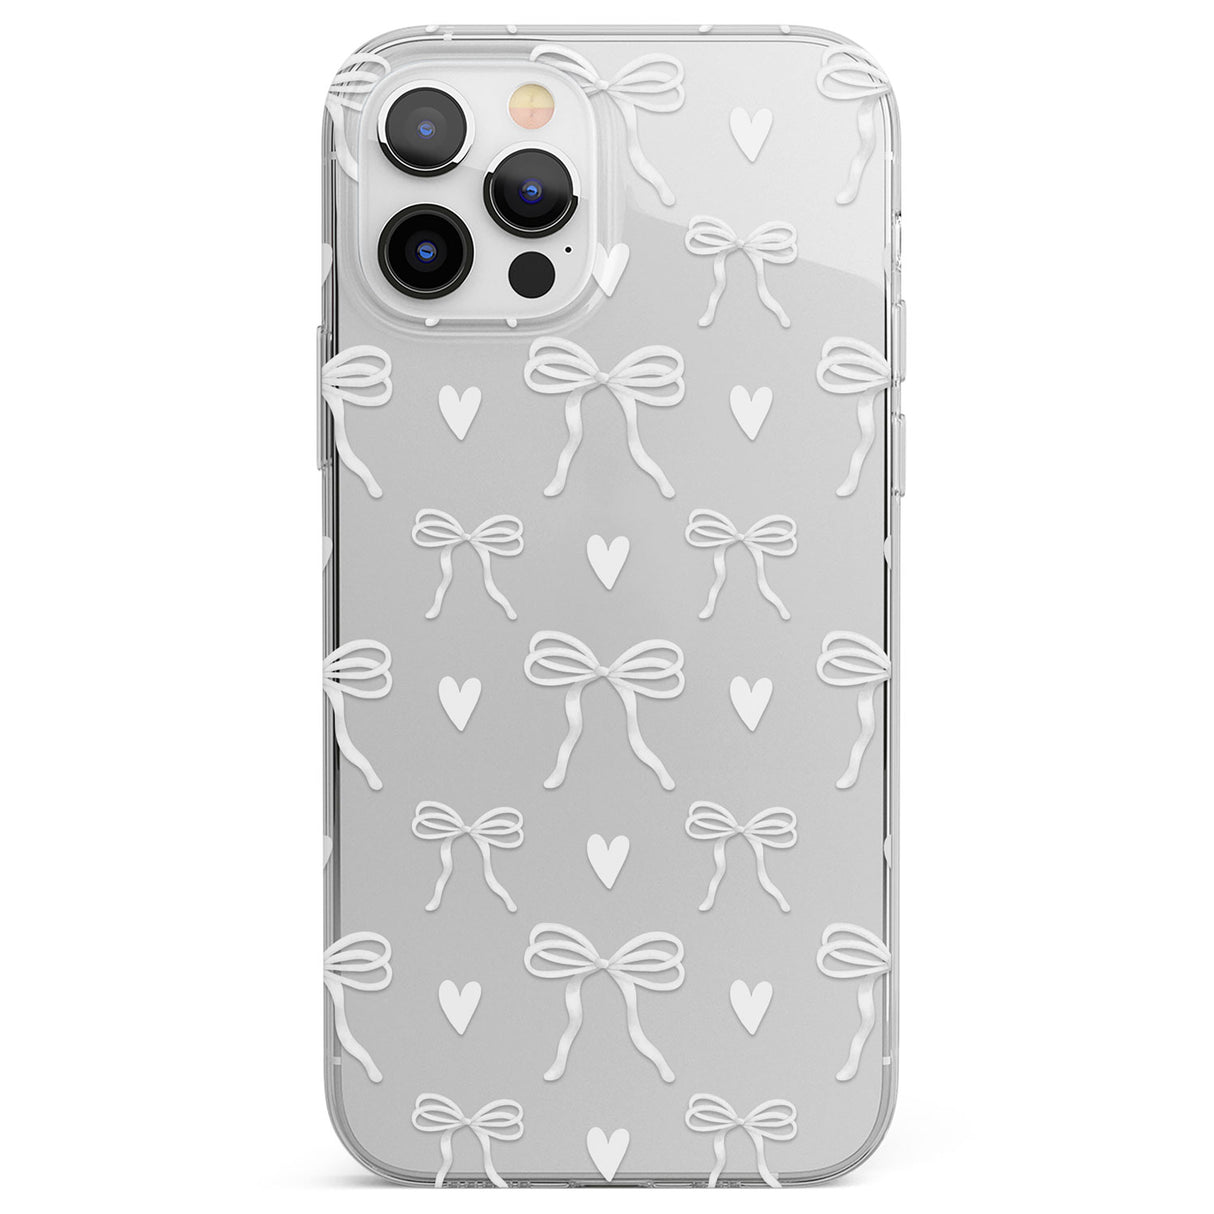 White Bows & Hearts Phone Case for iPhone 12 Pro